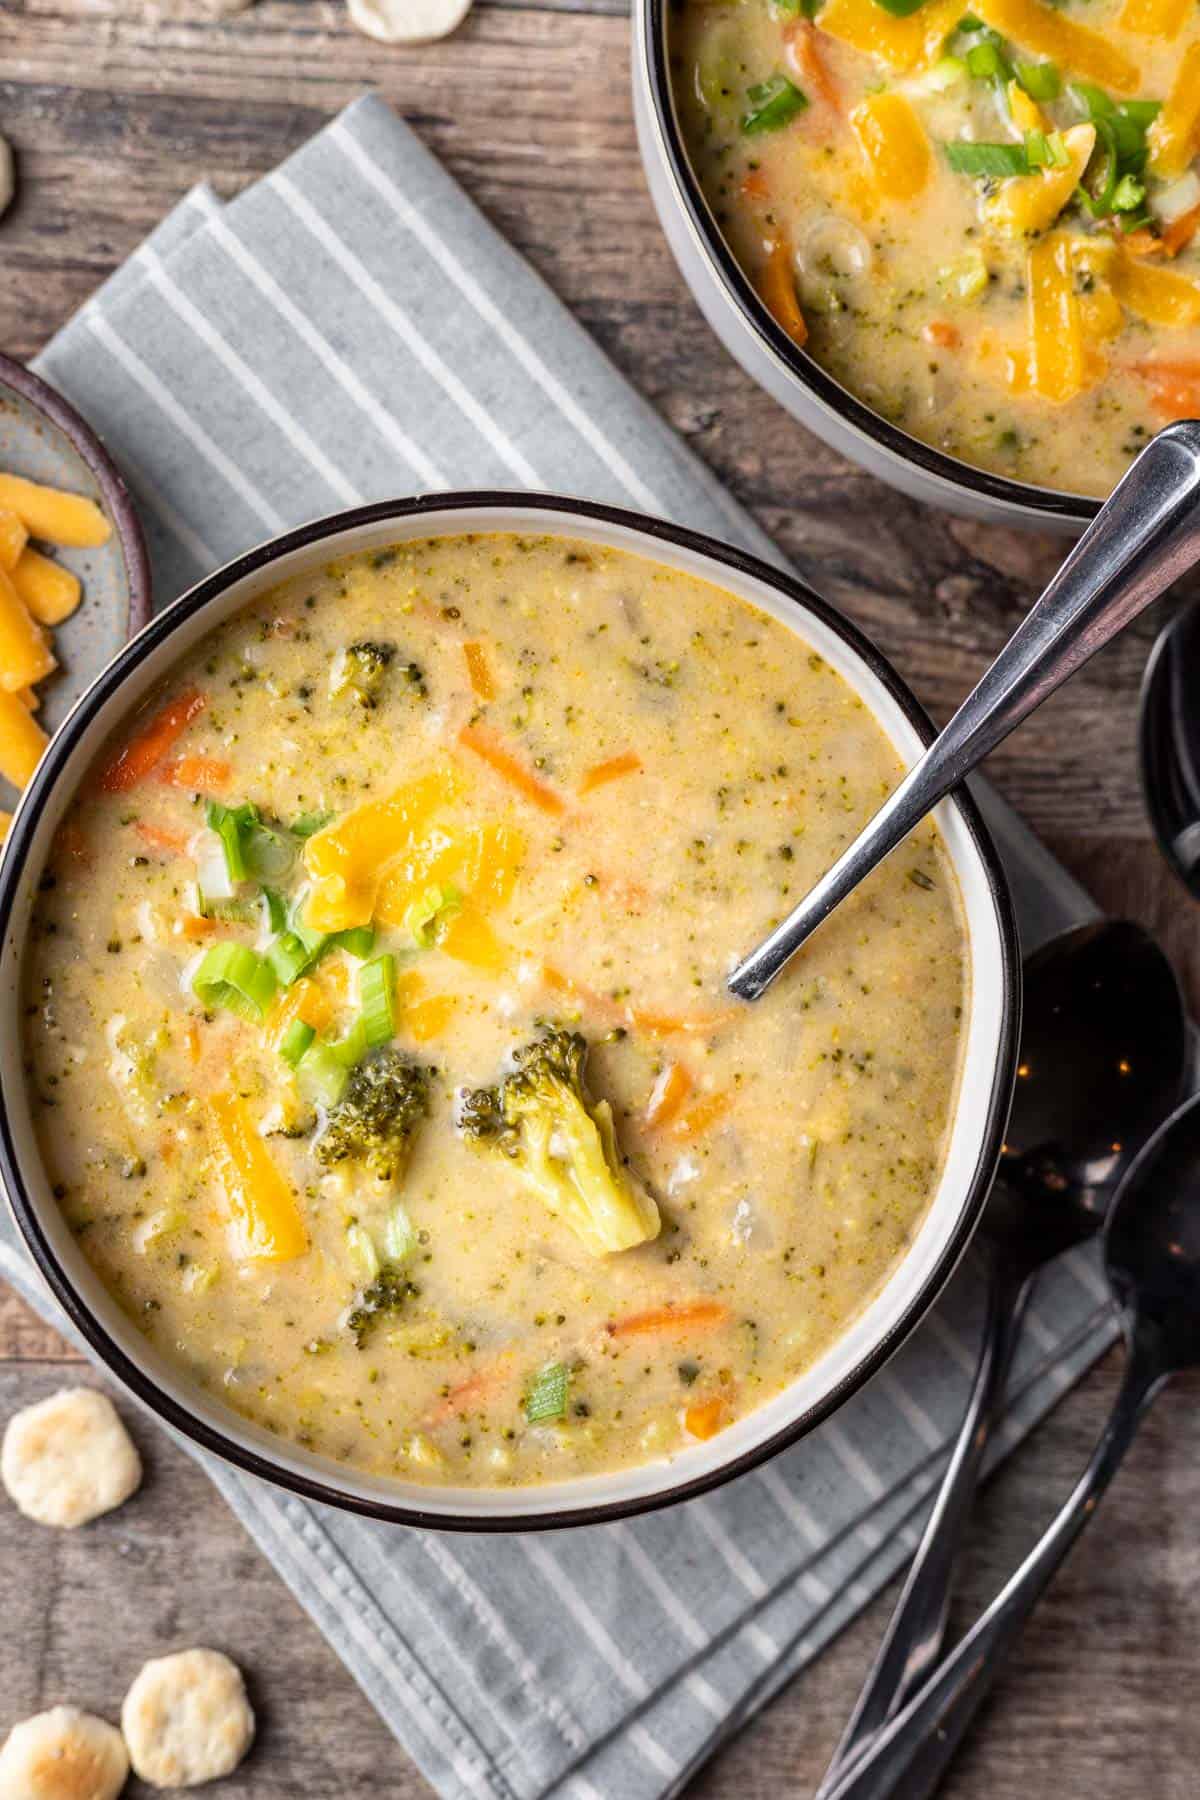 Instant pot broccoli cheddar soup in a bowl with a spoon.